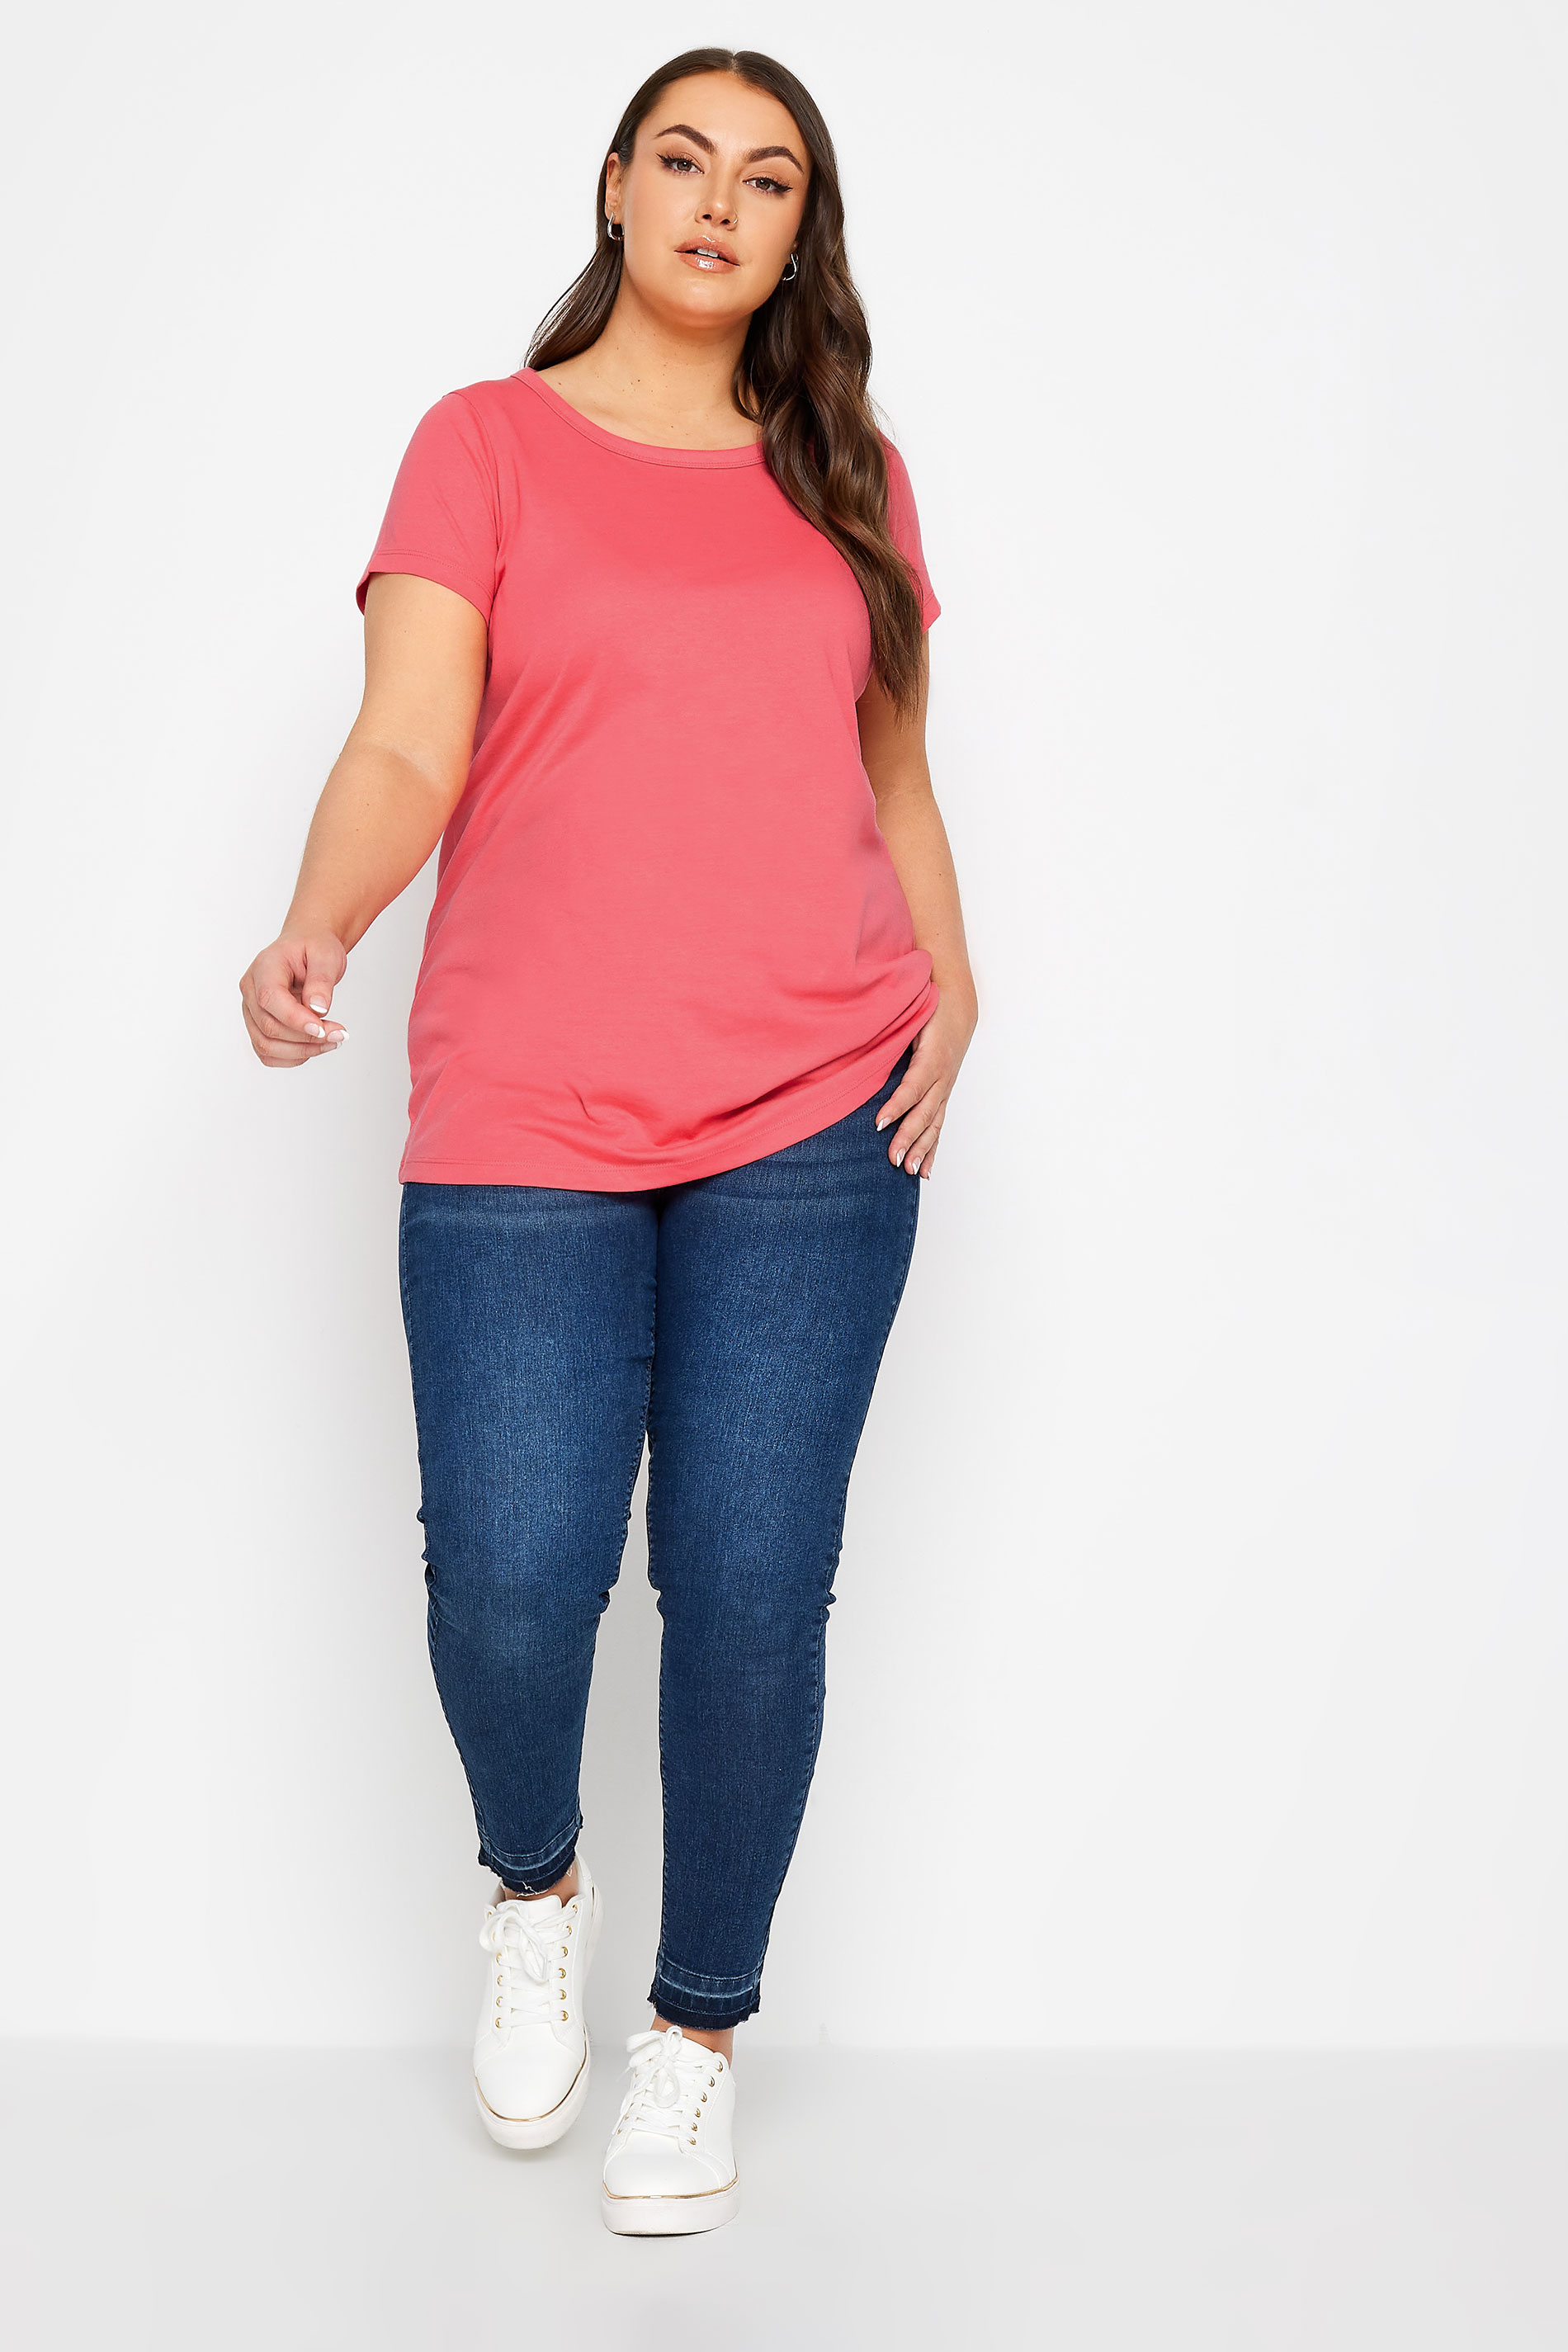 YOURS Plus Size Coral Pink Short Sleeve T-Shirt | Yours Clothing 2